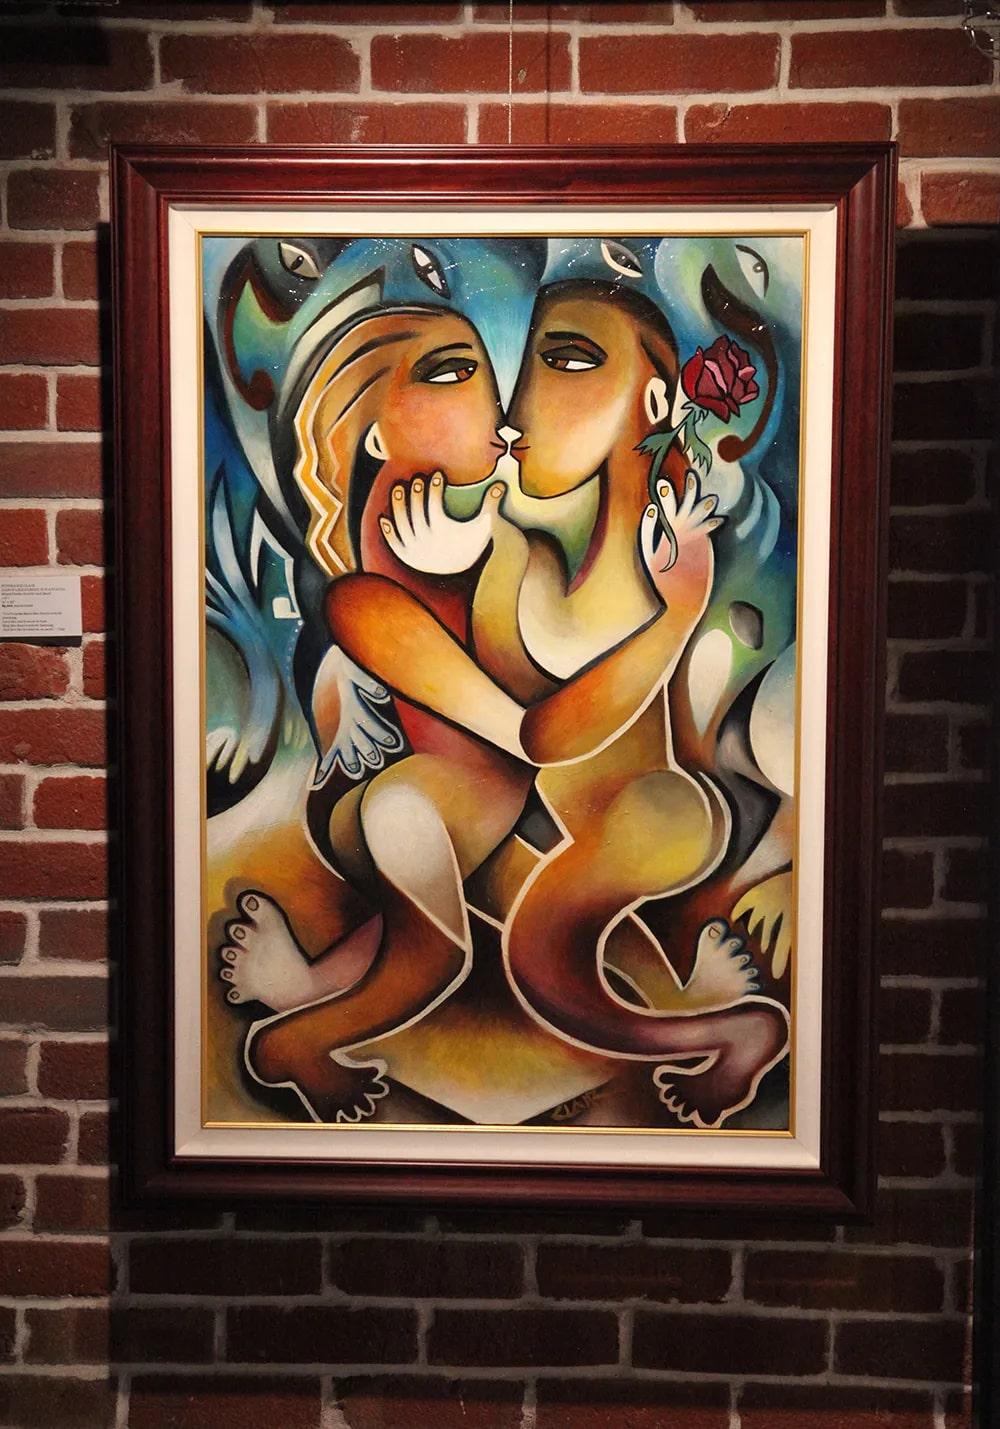 This is a one of a kind original figurative oil painting on canvas by Stephanie Clair. It is framed as pictured. Its dimensions are 31